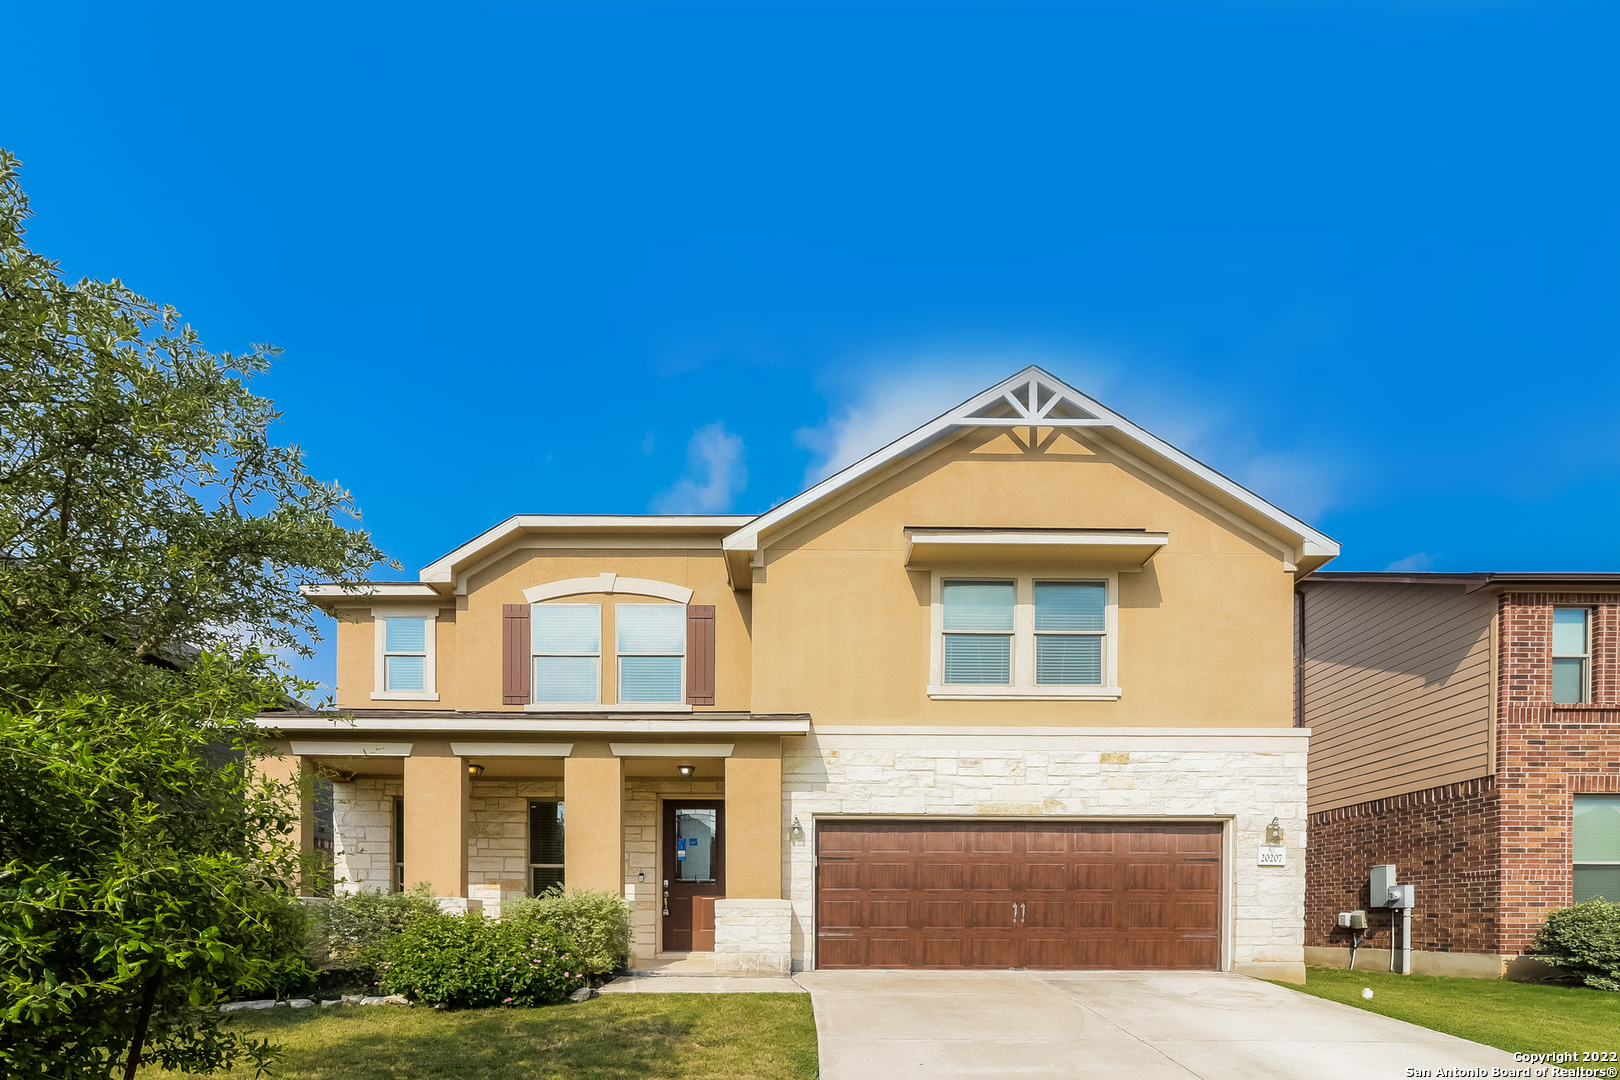 Built in 2015, this San Antonio two-story home offers granite countertops, and a two-car garage. This home has been virtually staged to illustrate its potential.